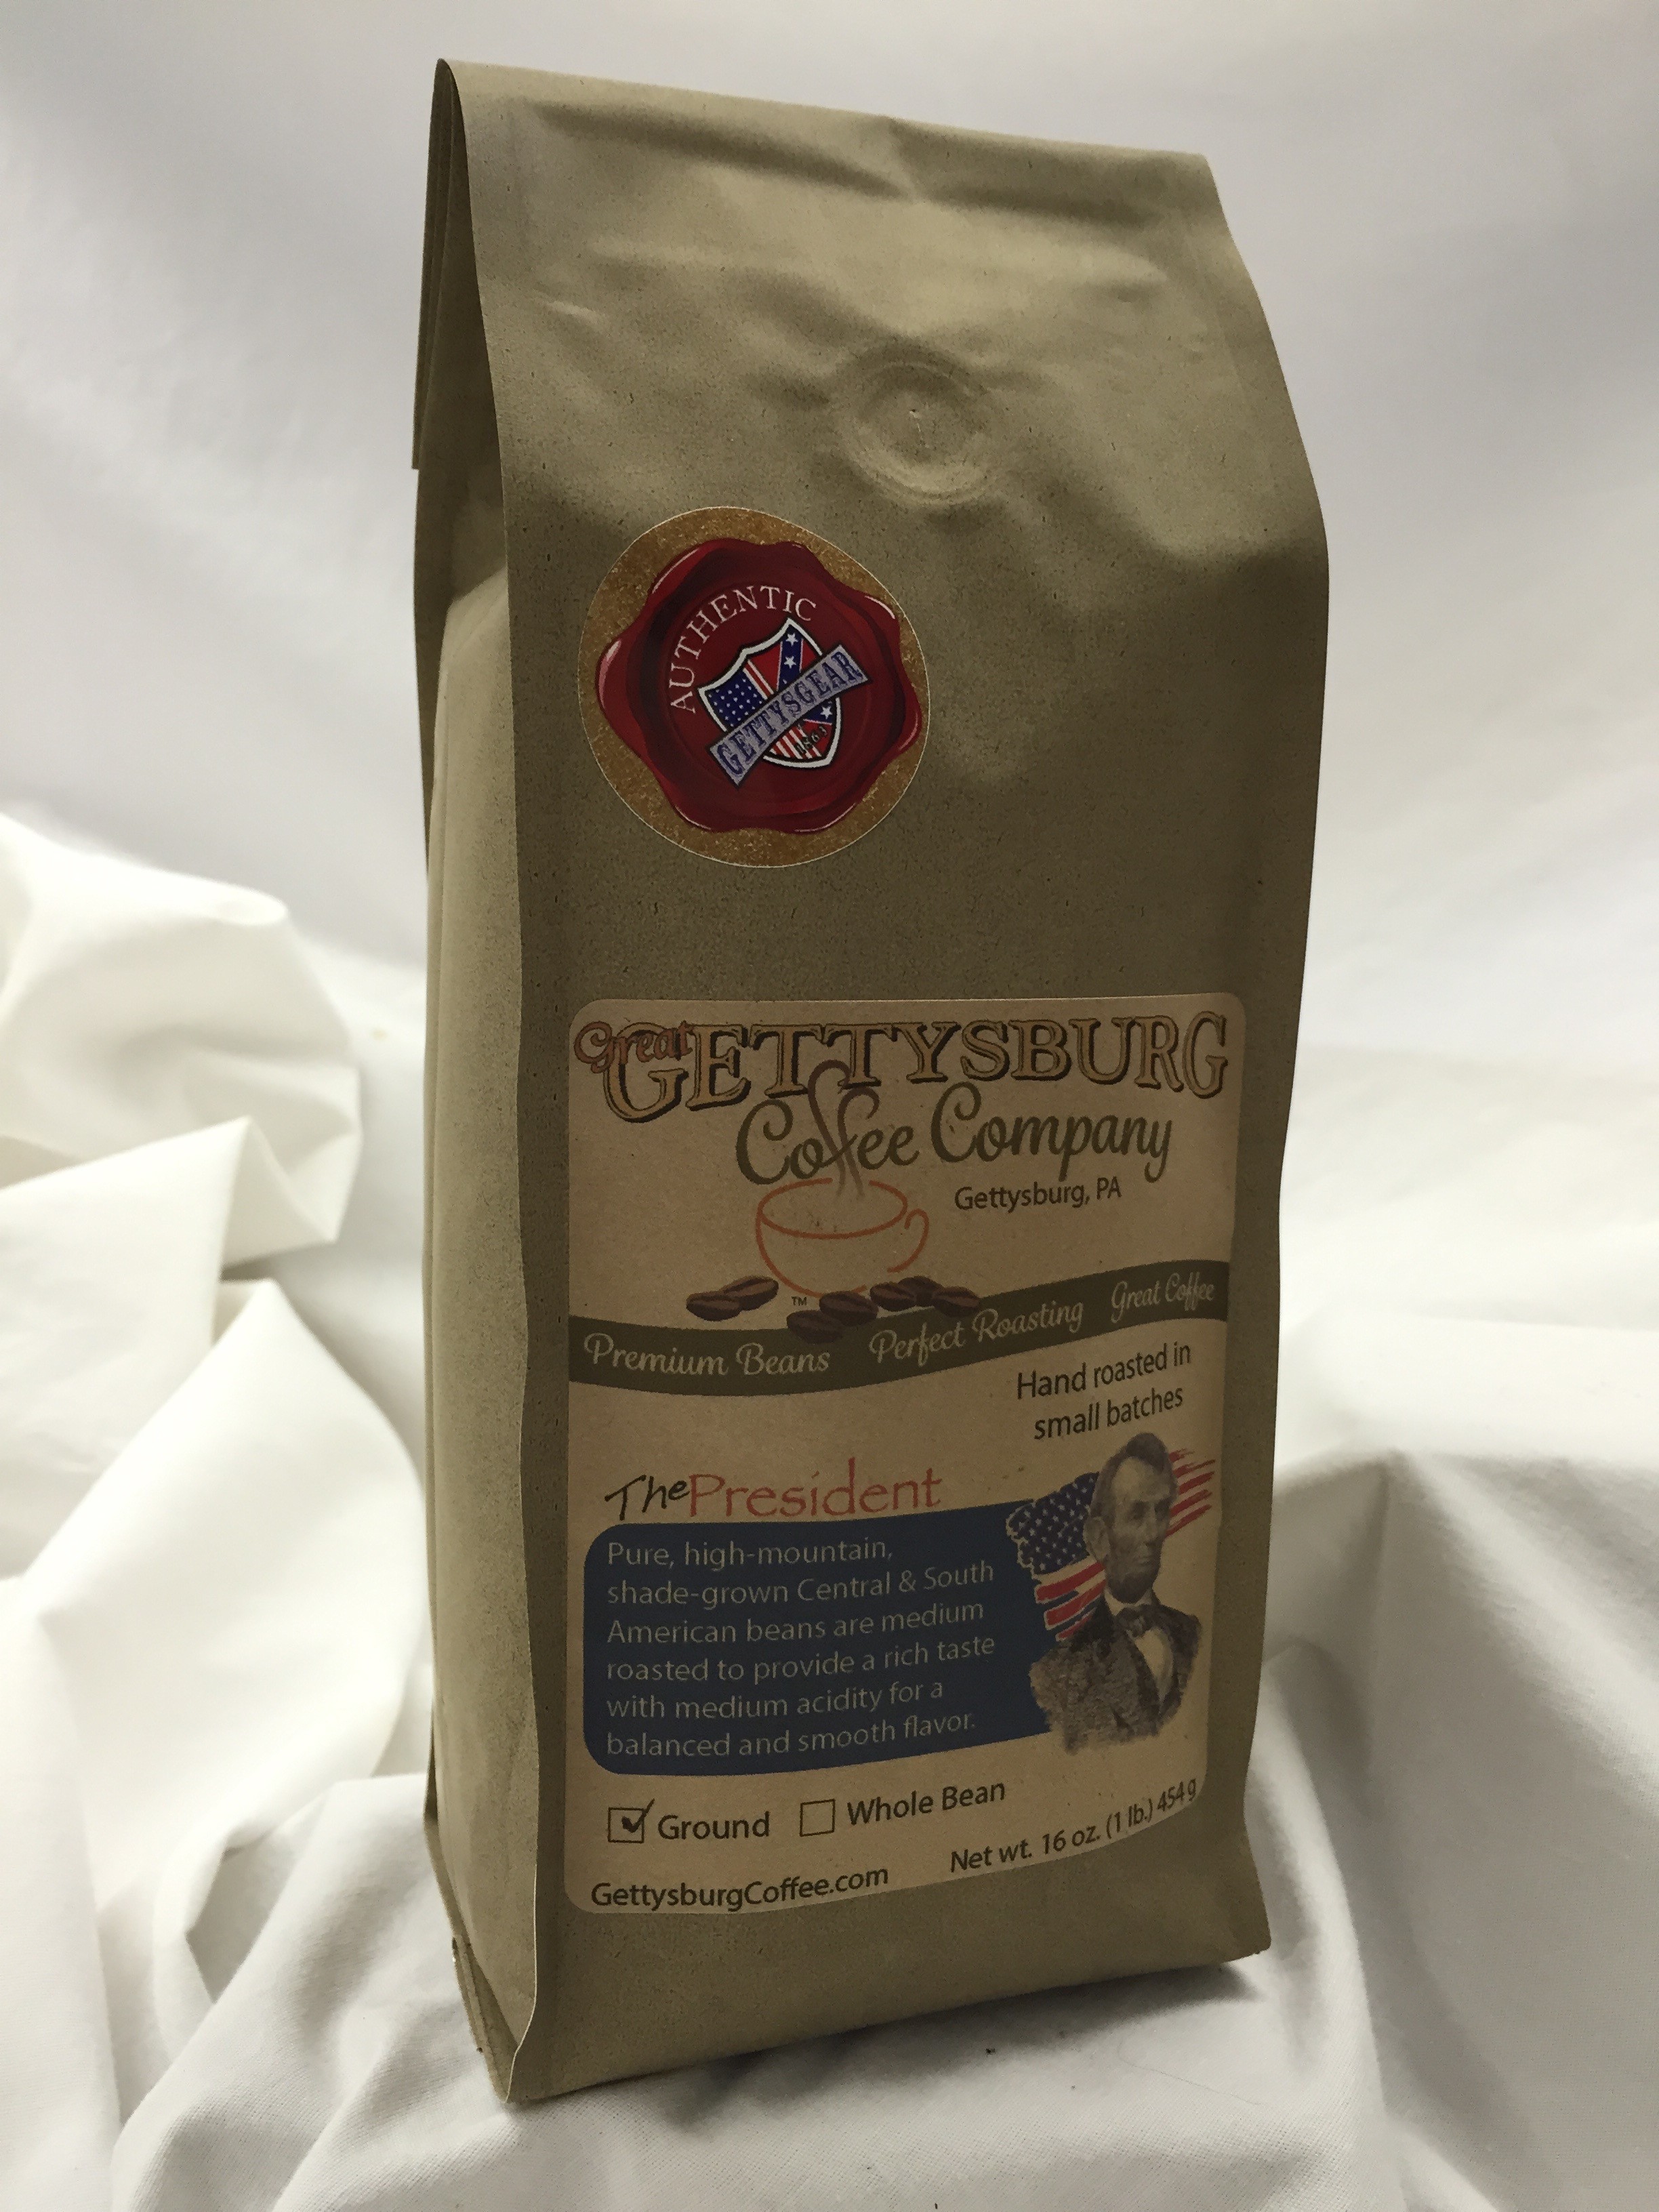 The finest beans hand roasted in small batches has repeat customers coming back for more.